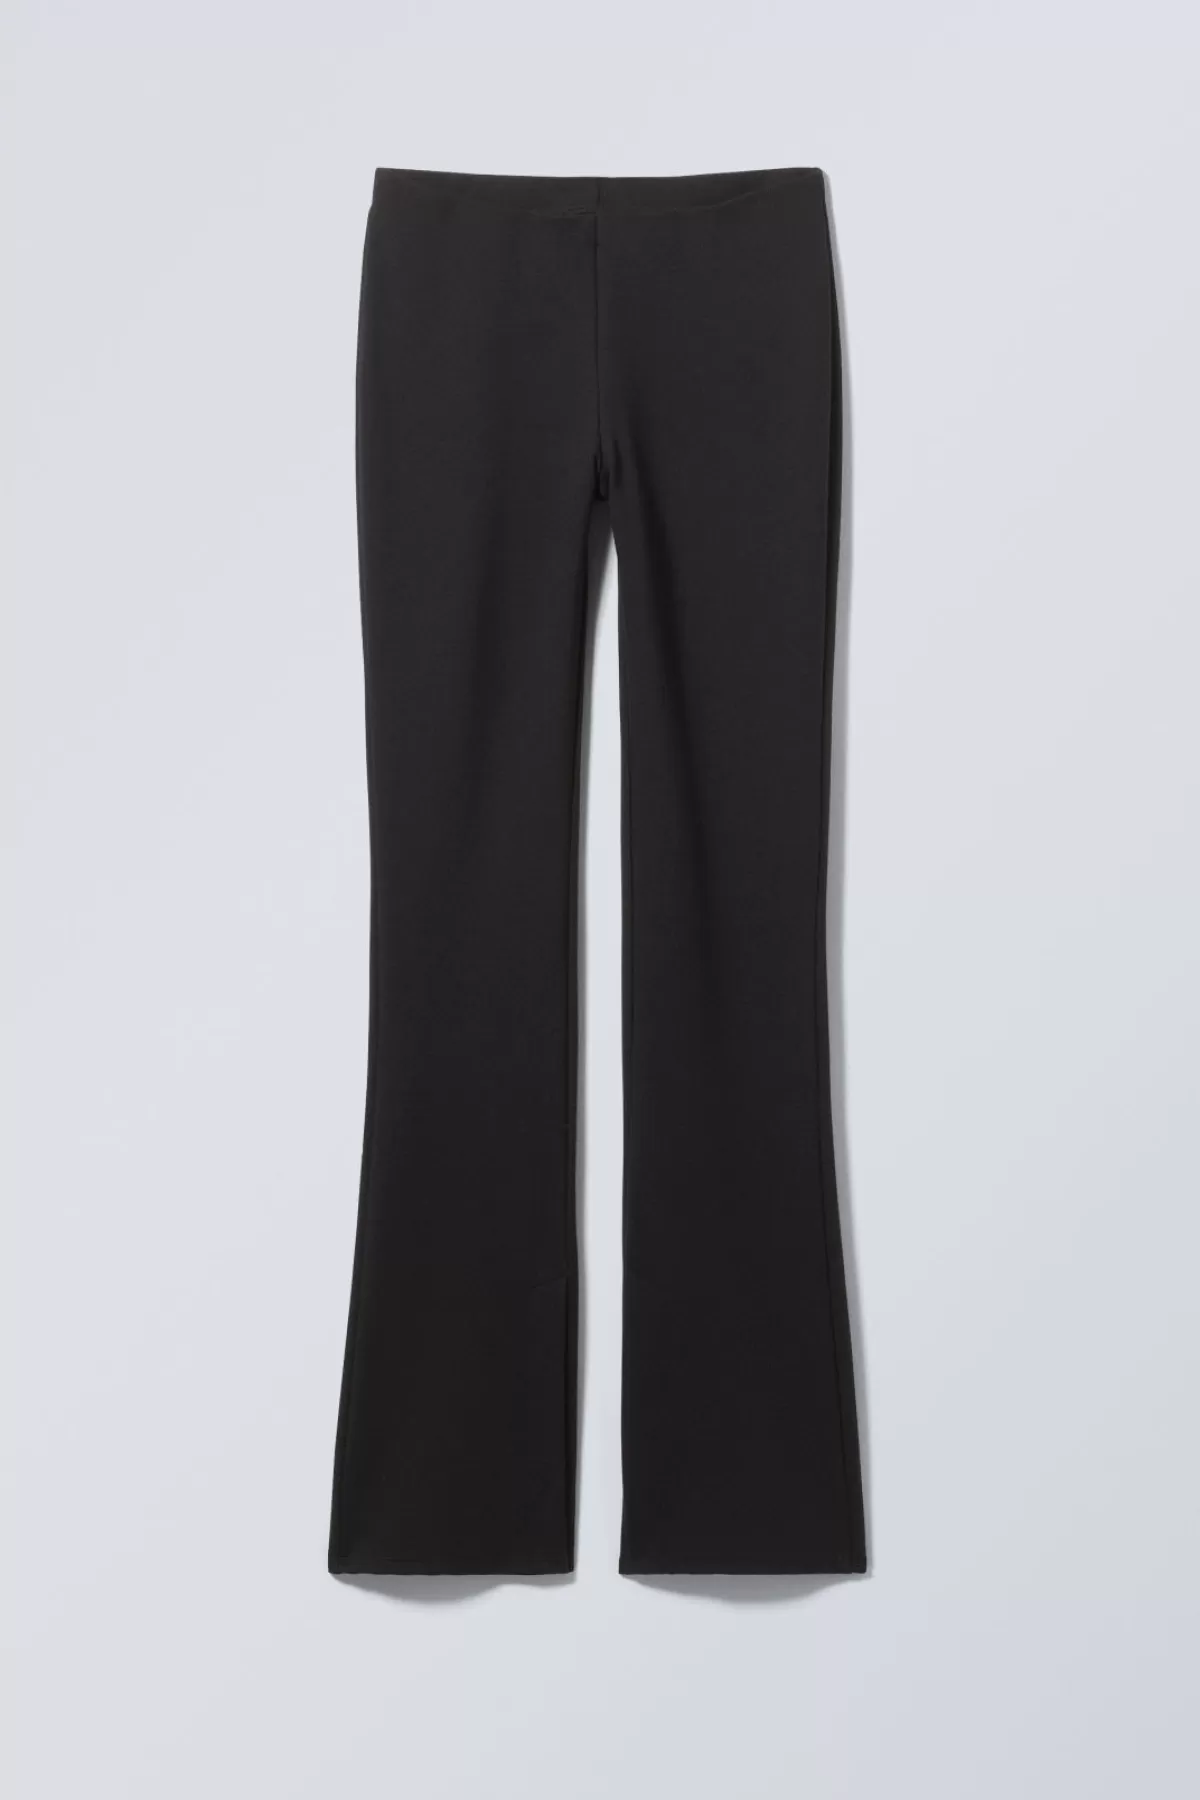 Weekday Philo Flared Jersey Trousers Black Sale